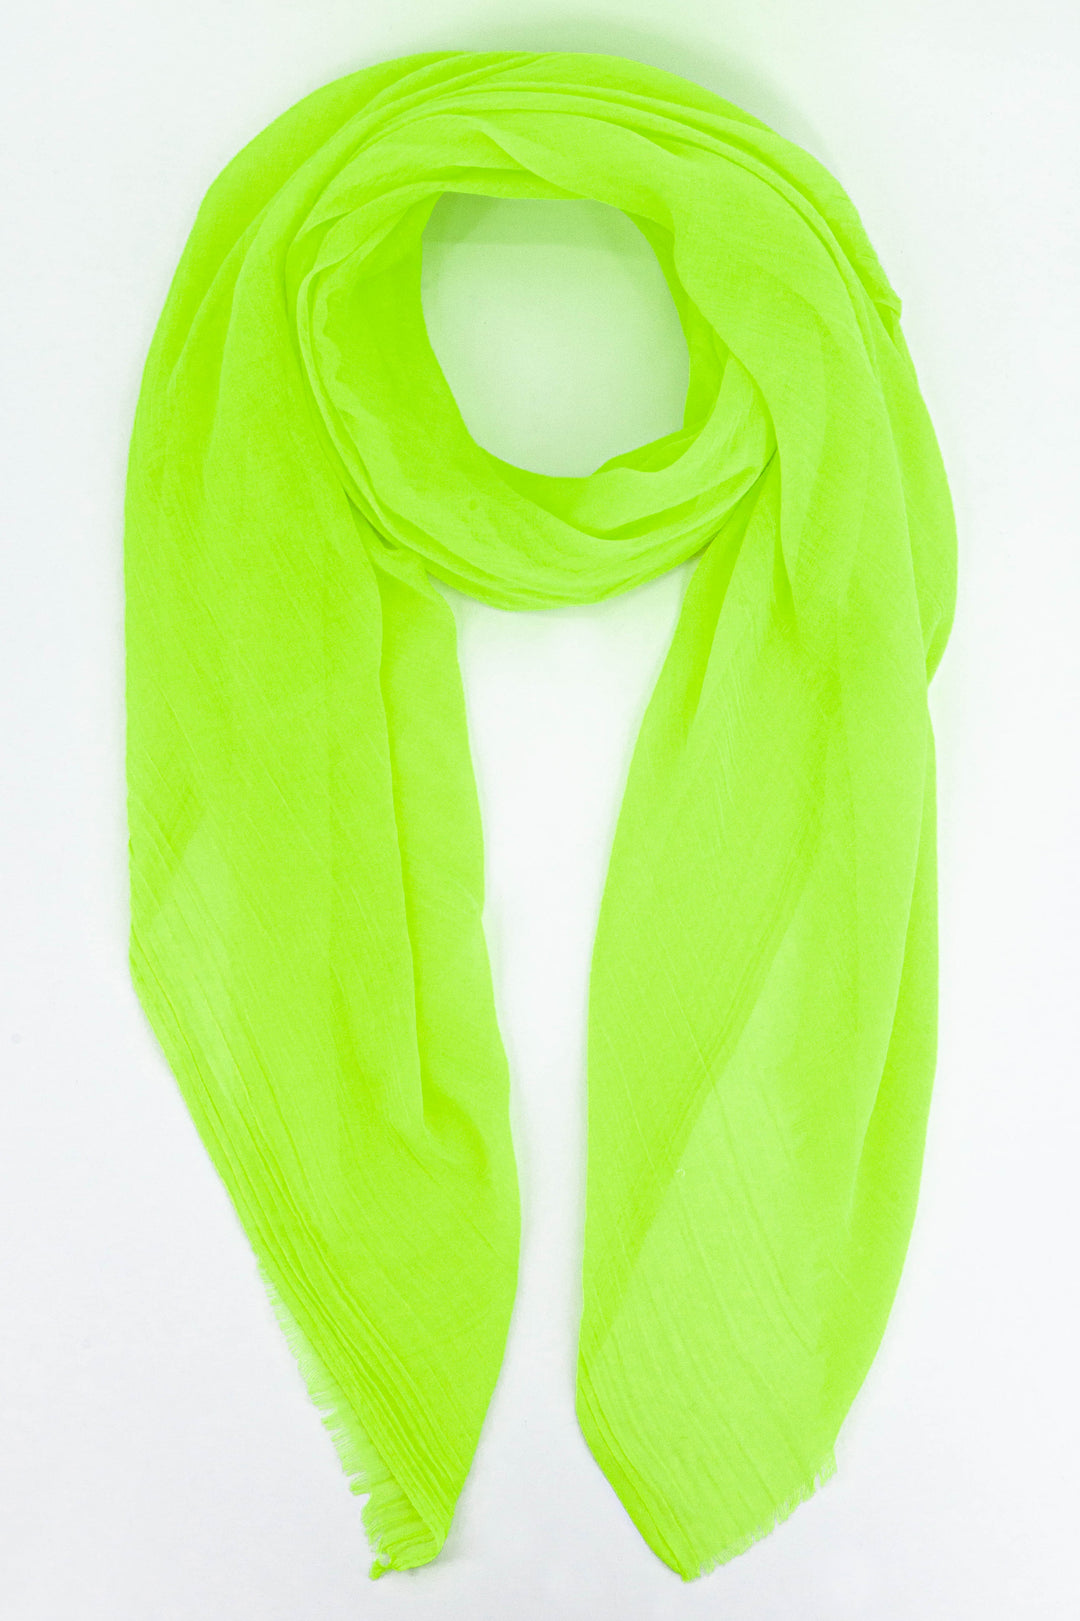 plain neon yellow lightweight summer scarf with a fringed edge